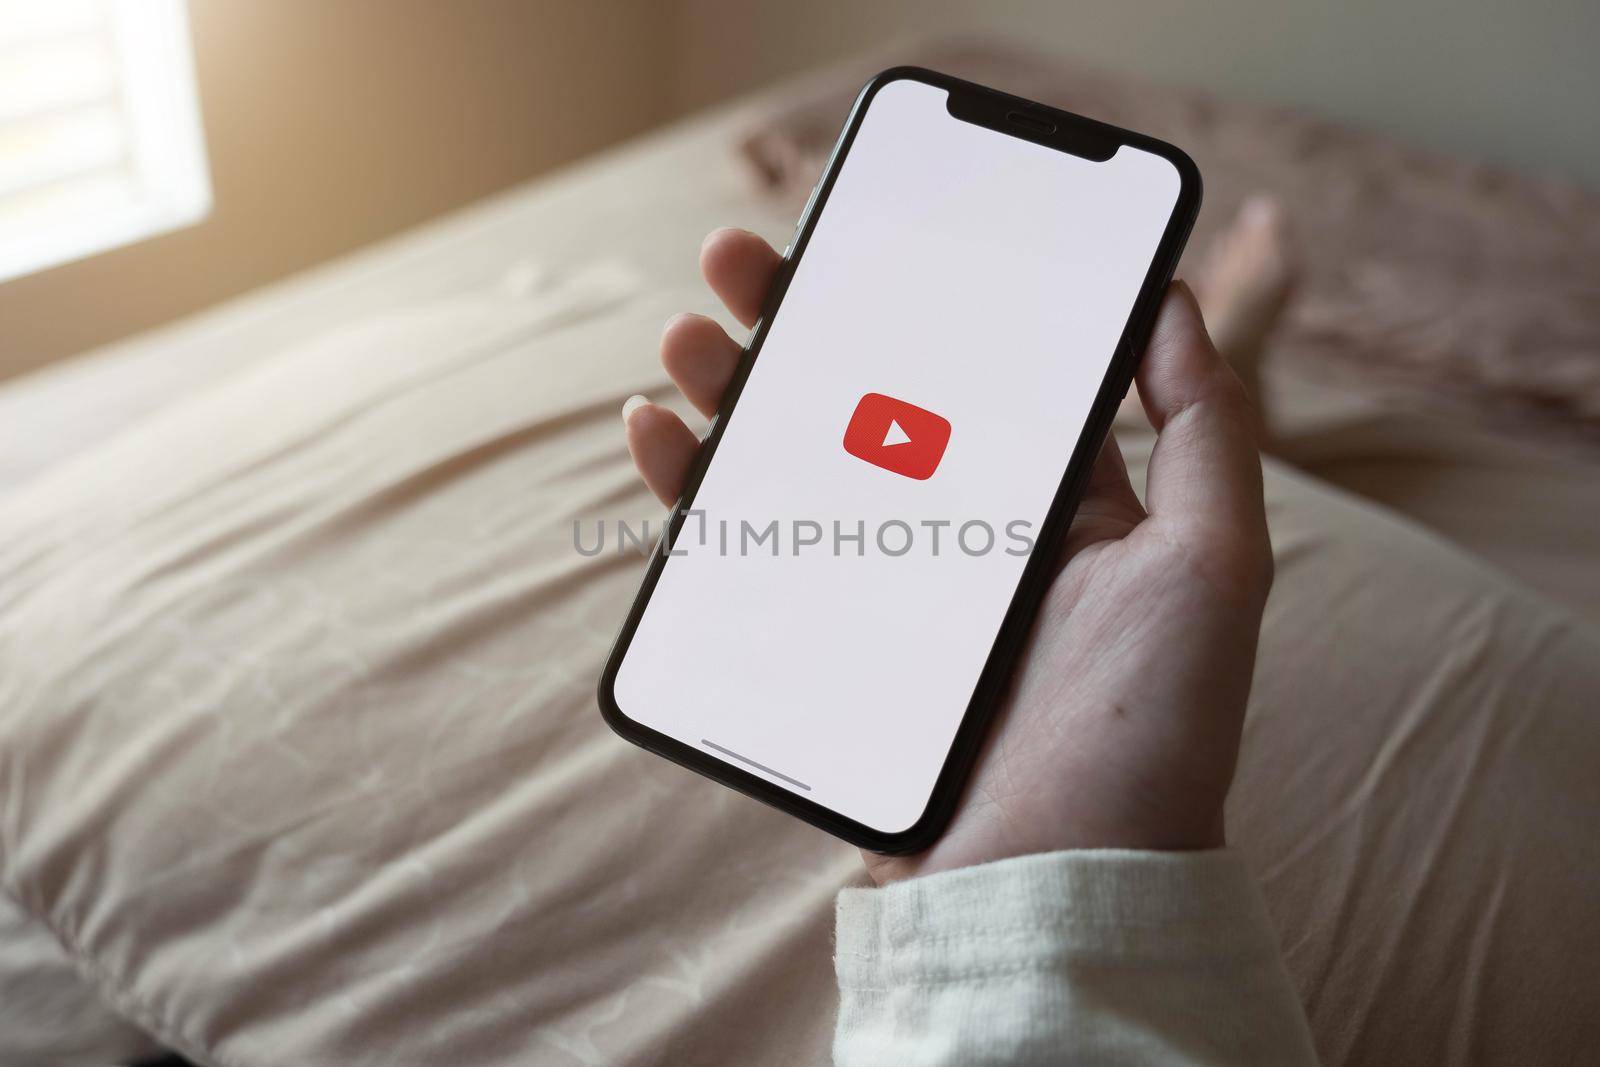 CHIANG MAI, THAILAND - JUNE 7, 2020: Latest generation iPhone X with YouTube logo on the screen by nateemee